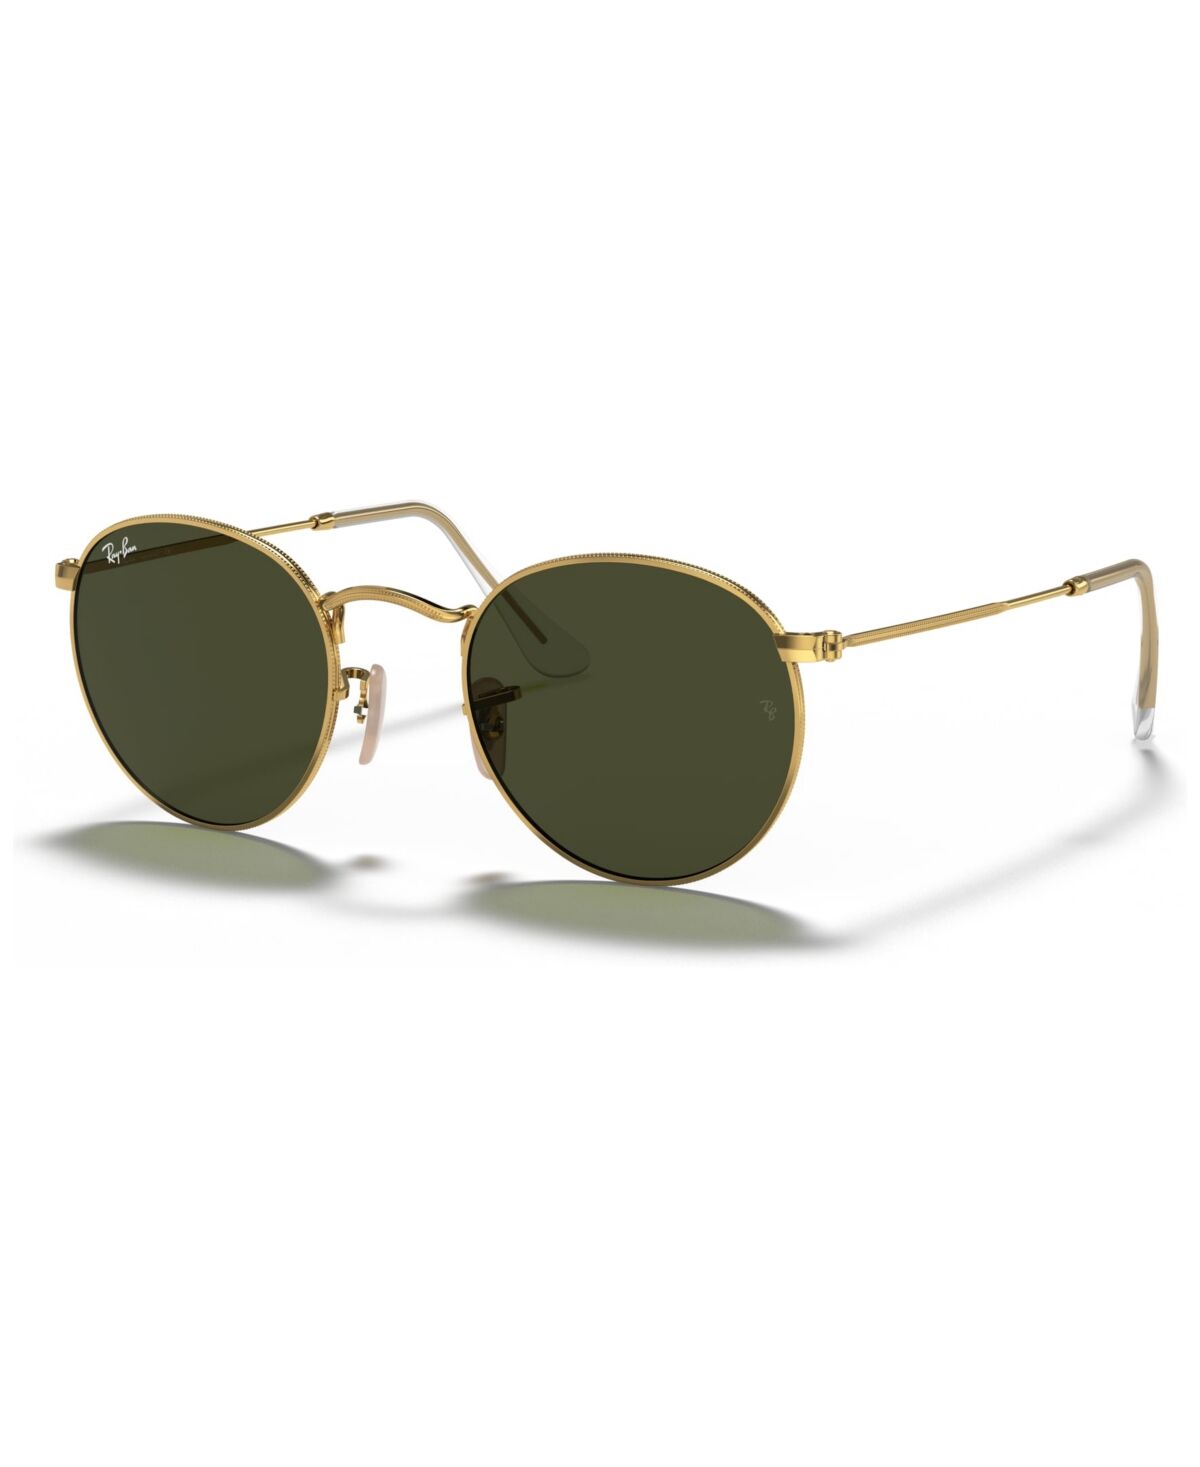 Ray-Ban Unisex Sunglasses, RB3447 Round Metal - GOLD-TONE GREEN